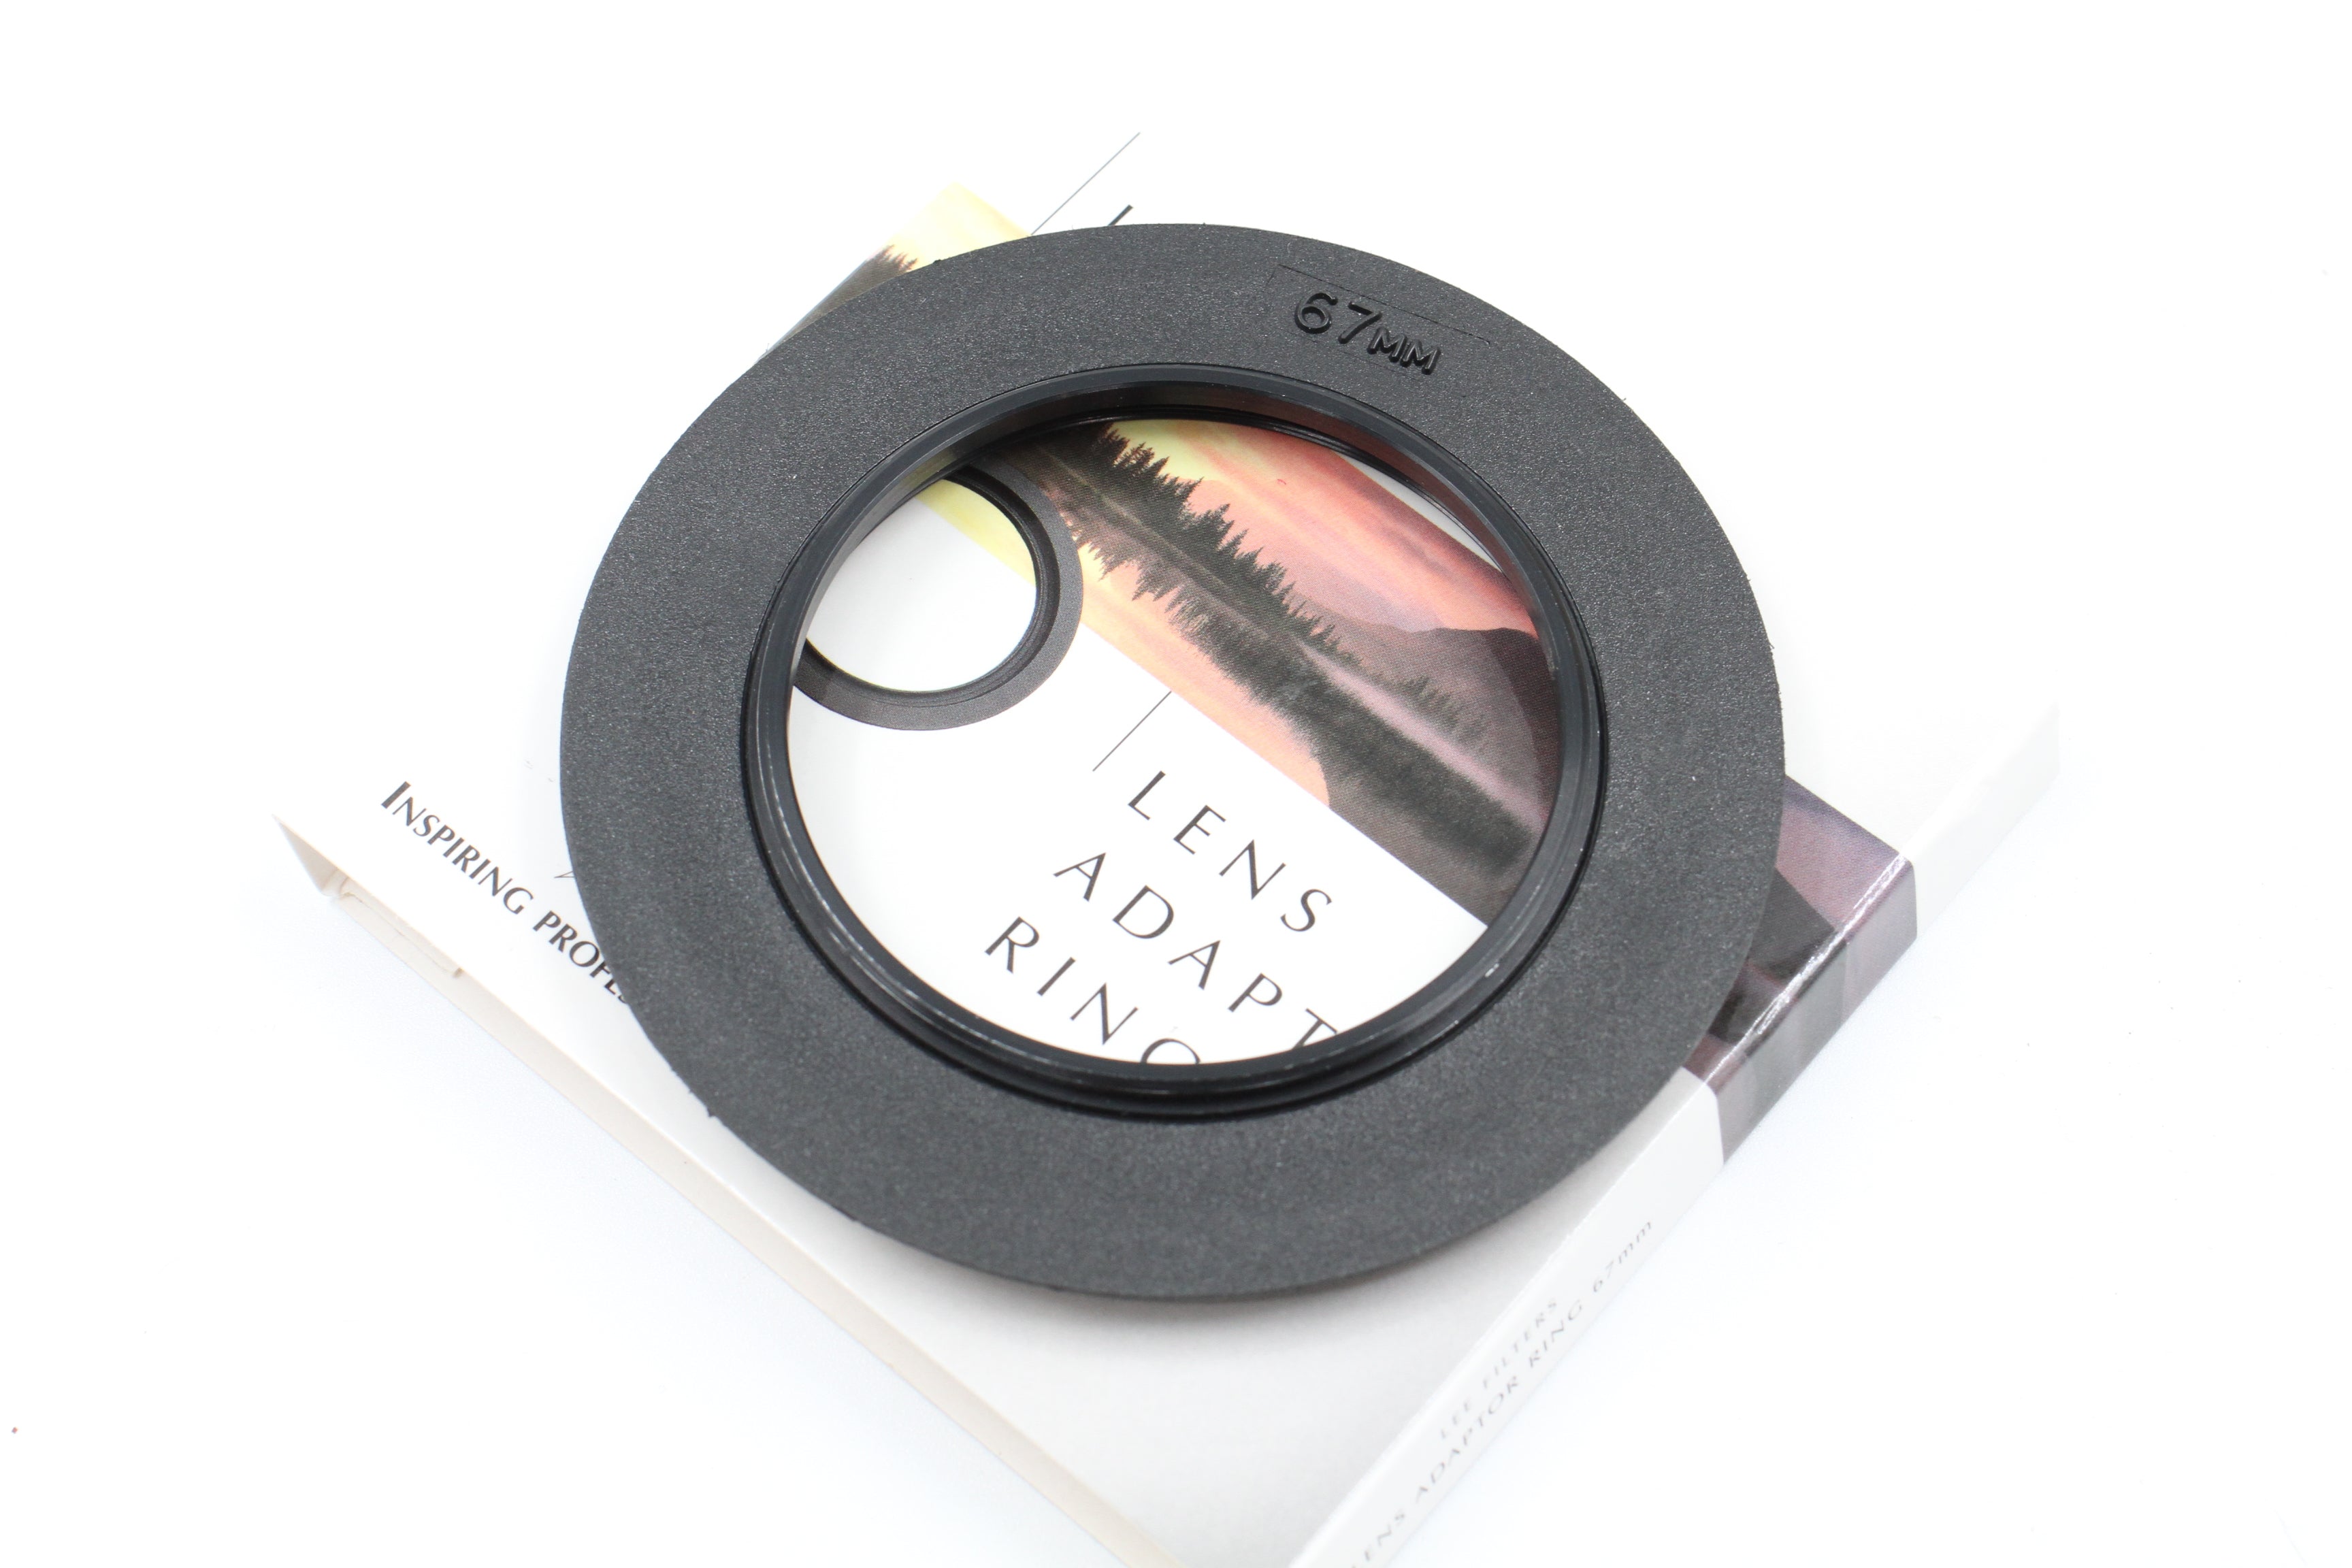 LEE 100 Lens Adapter Ring 67mm, Boxed